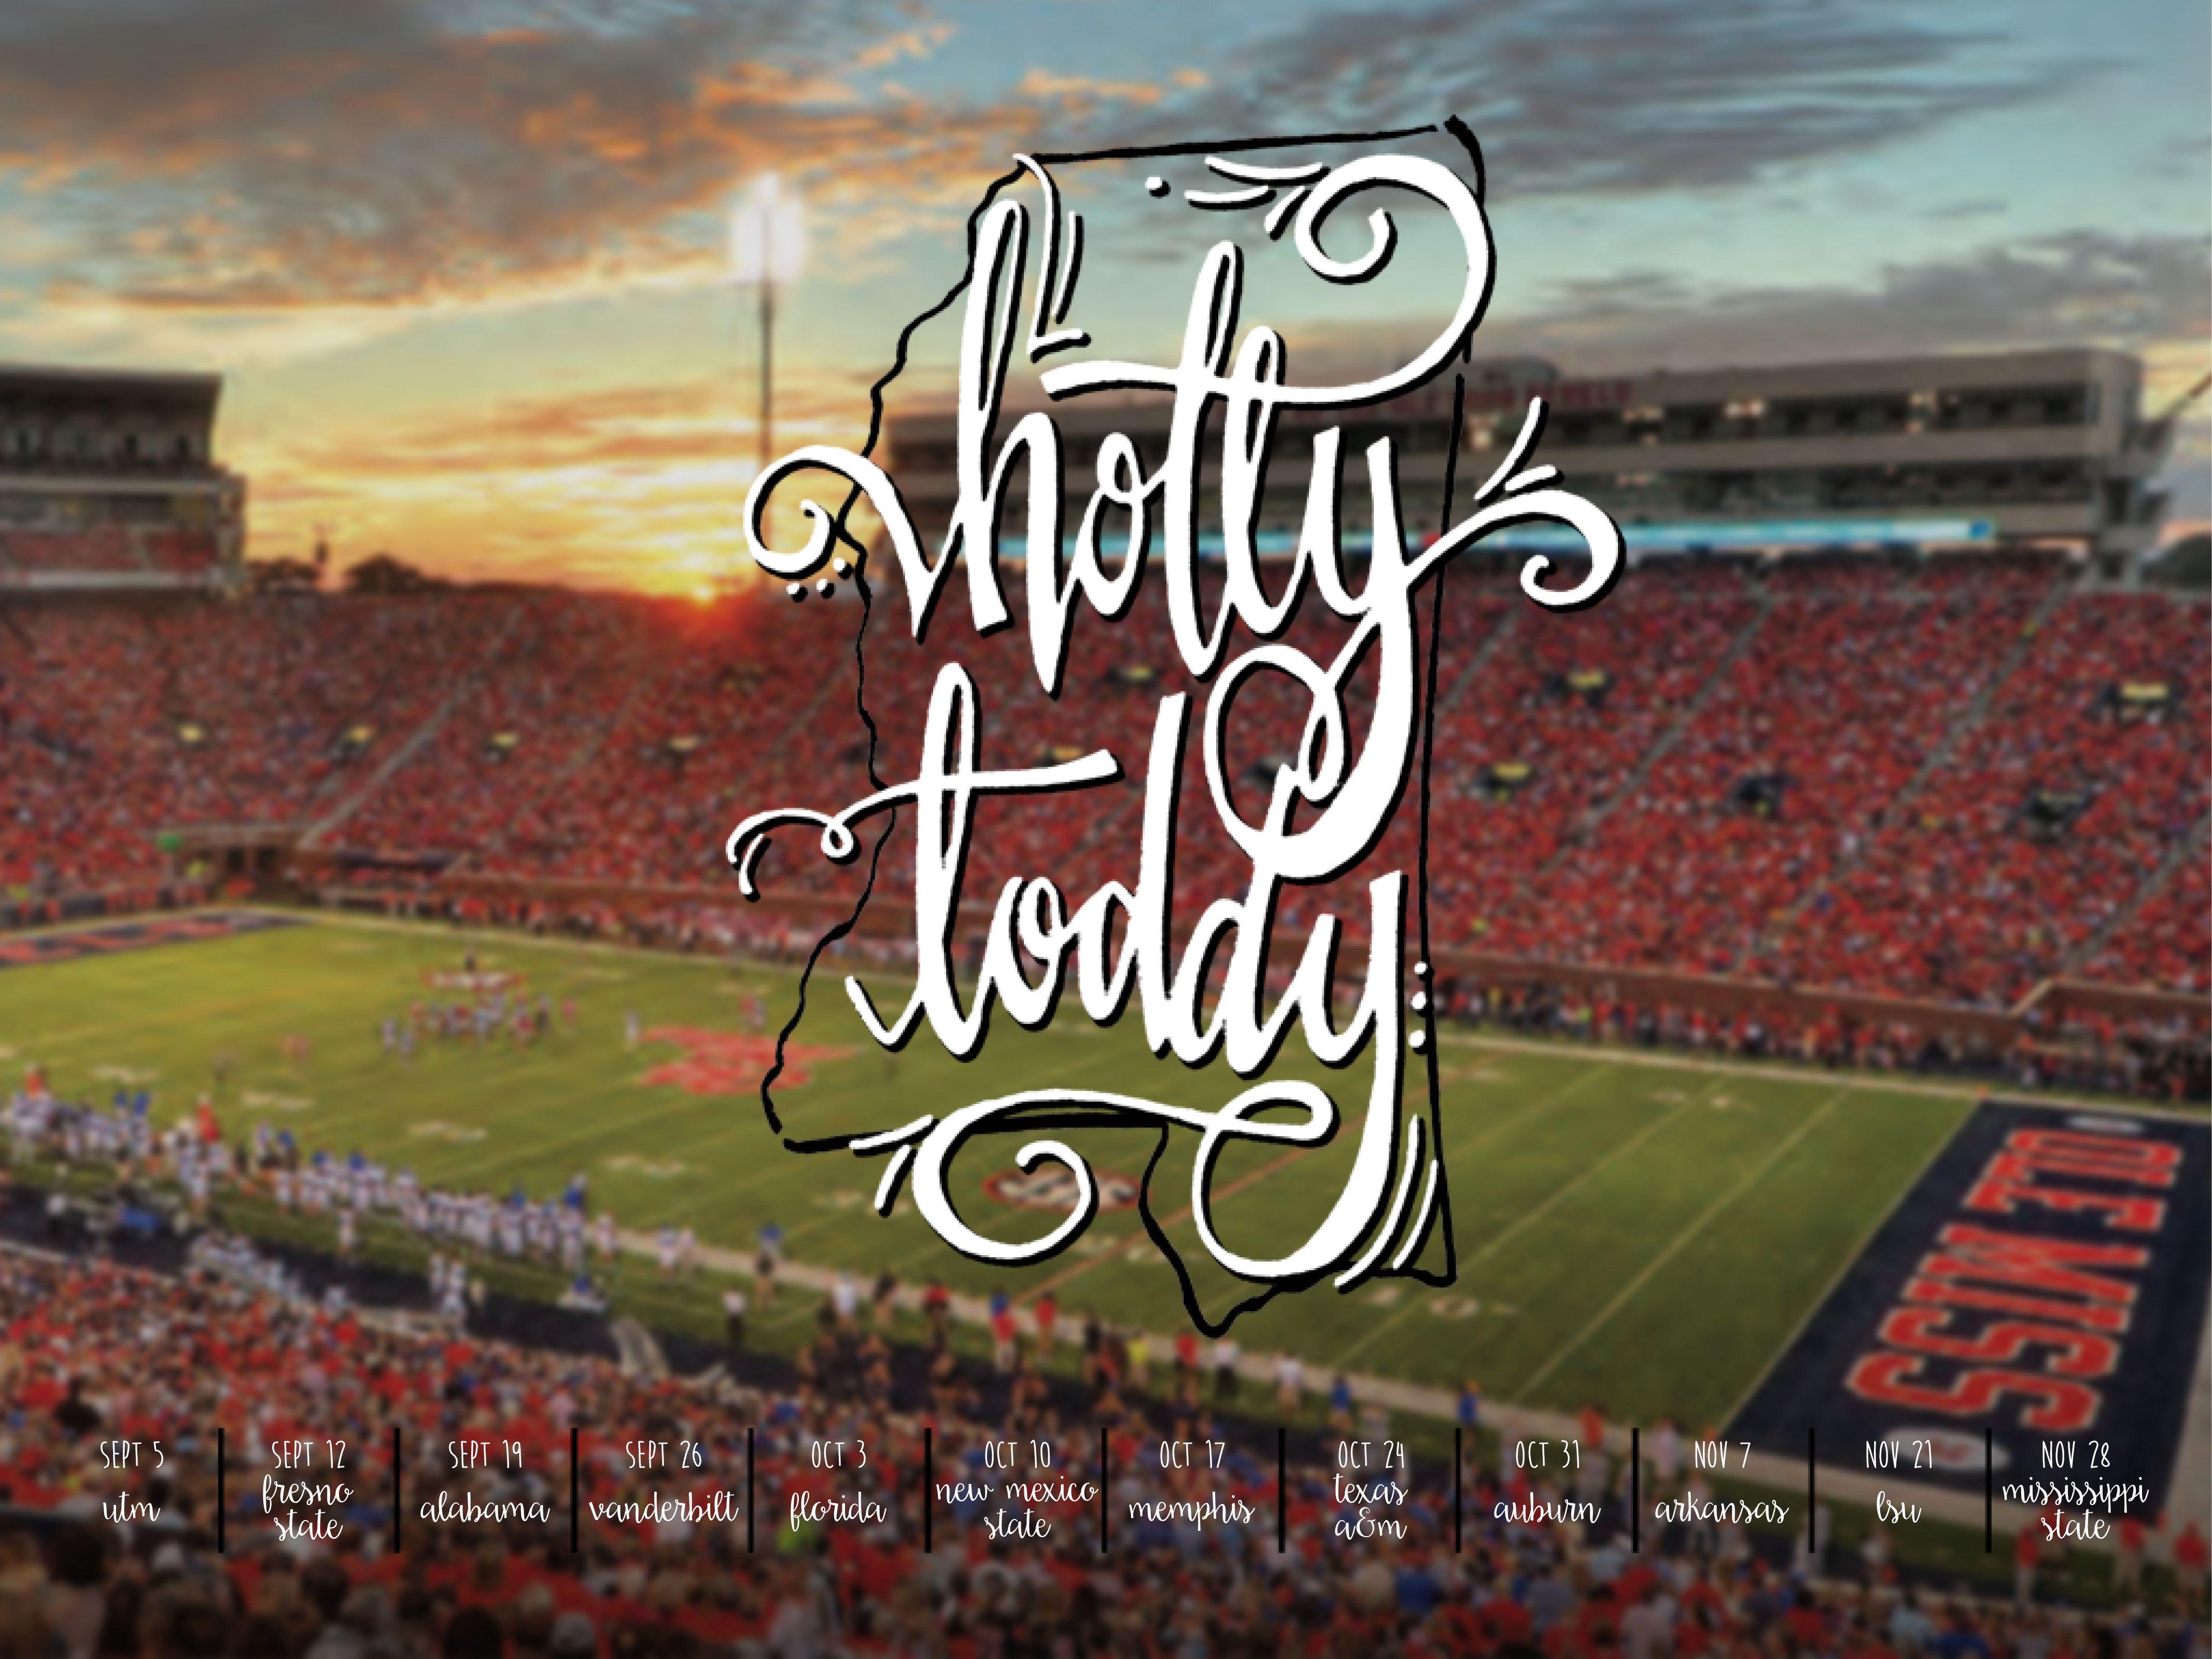 Ole Miss Wallpapers Browser Themes  More for Rebels Fans  Ole miss Ole  miss football Ole miss rebels